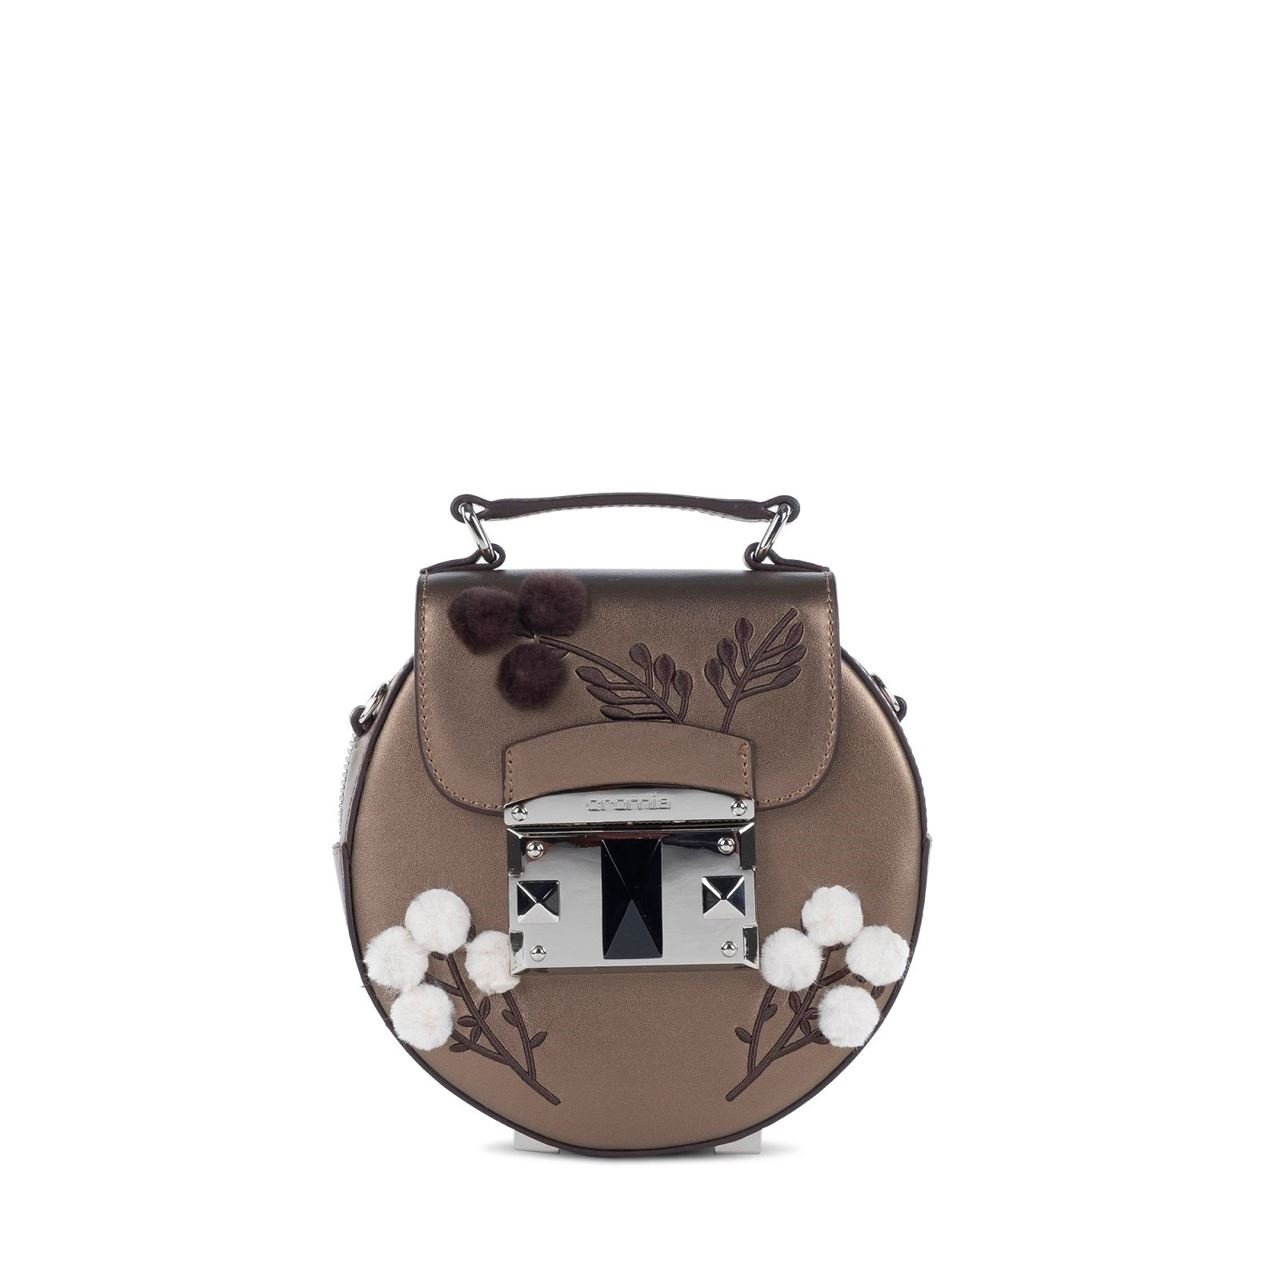 IT Nature mini bags by Cromia